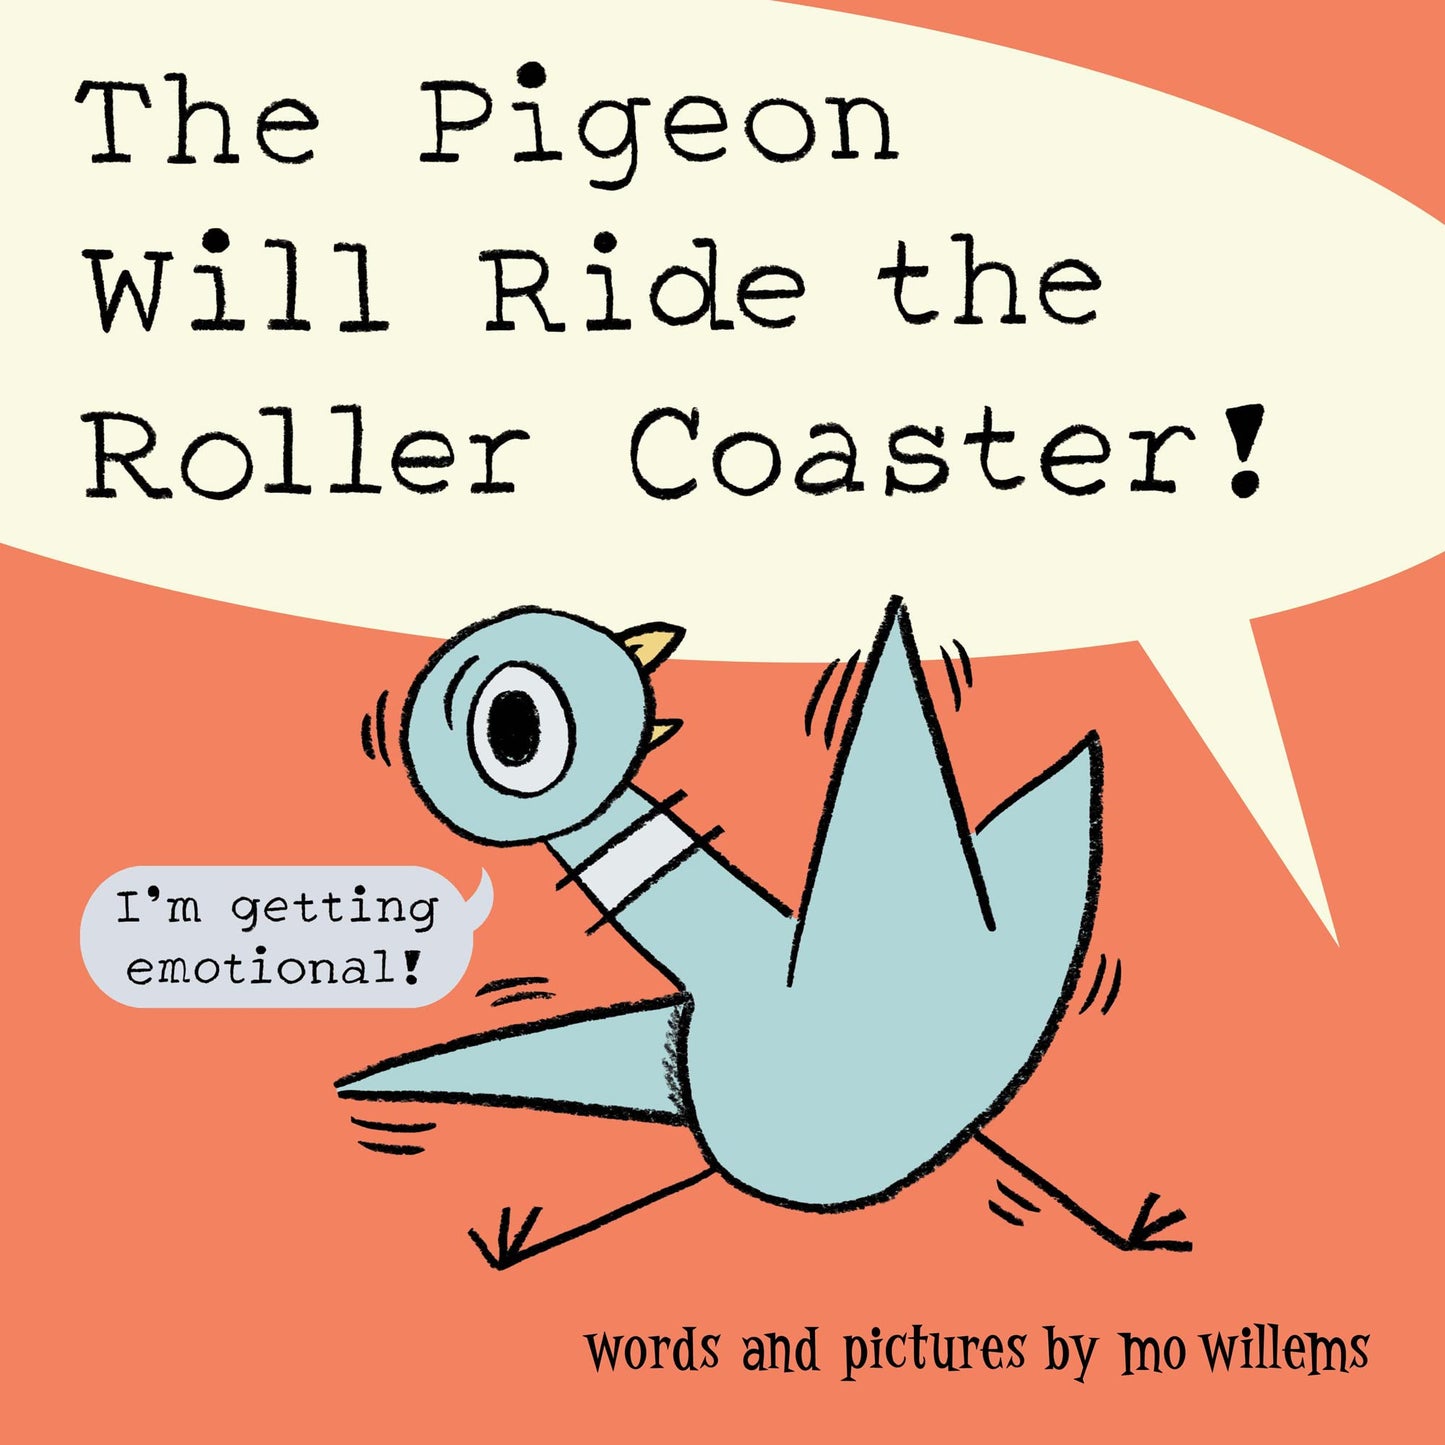 The Pigeon Will Ride the Rollercoaster